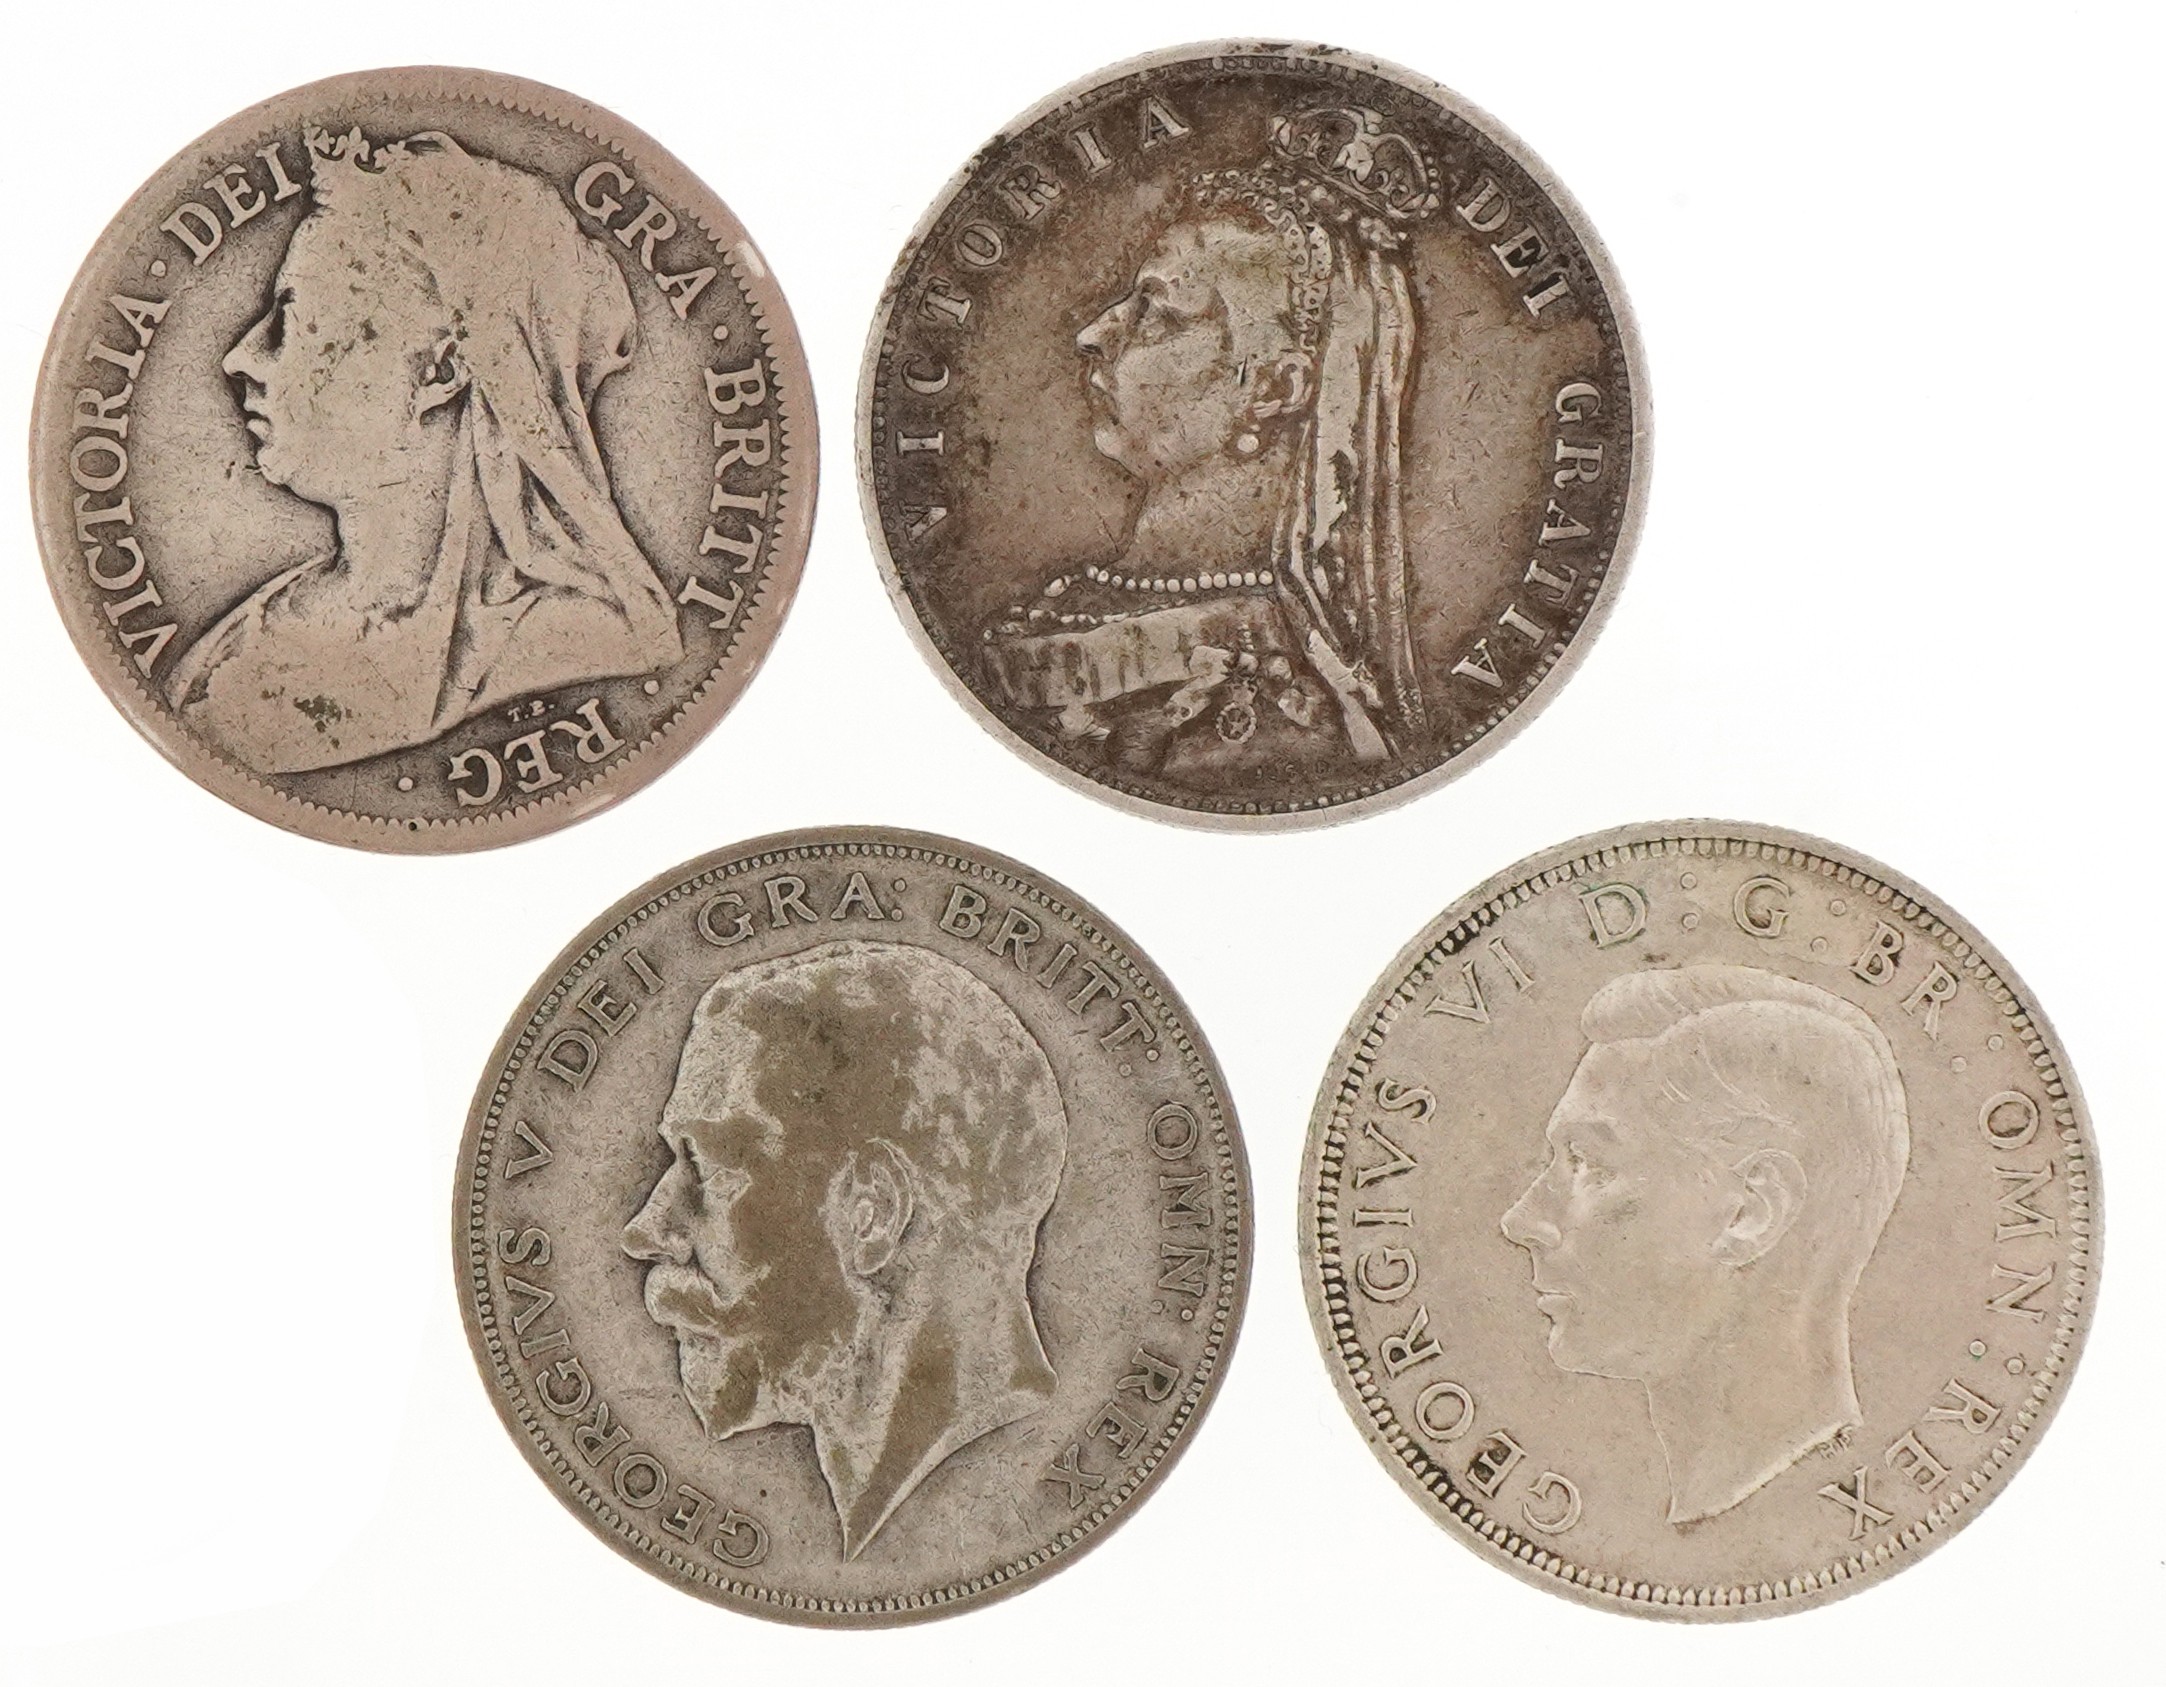 Queen Victoria half crowns dates 1887 and 1900, George V half crowns dates 1923 and 1924 and